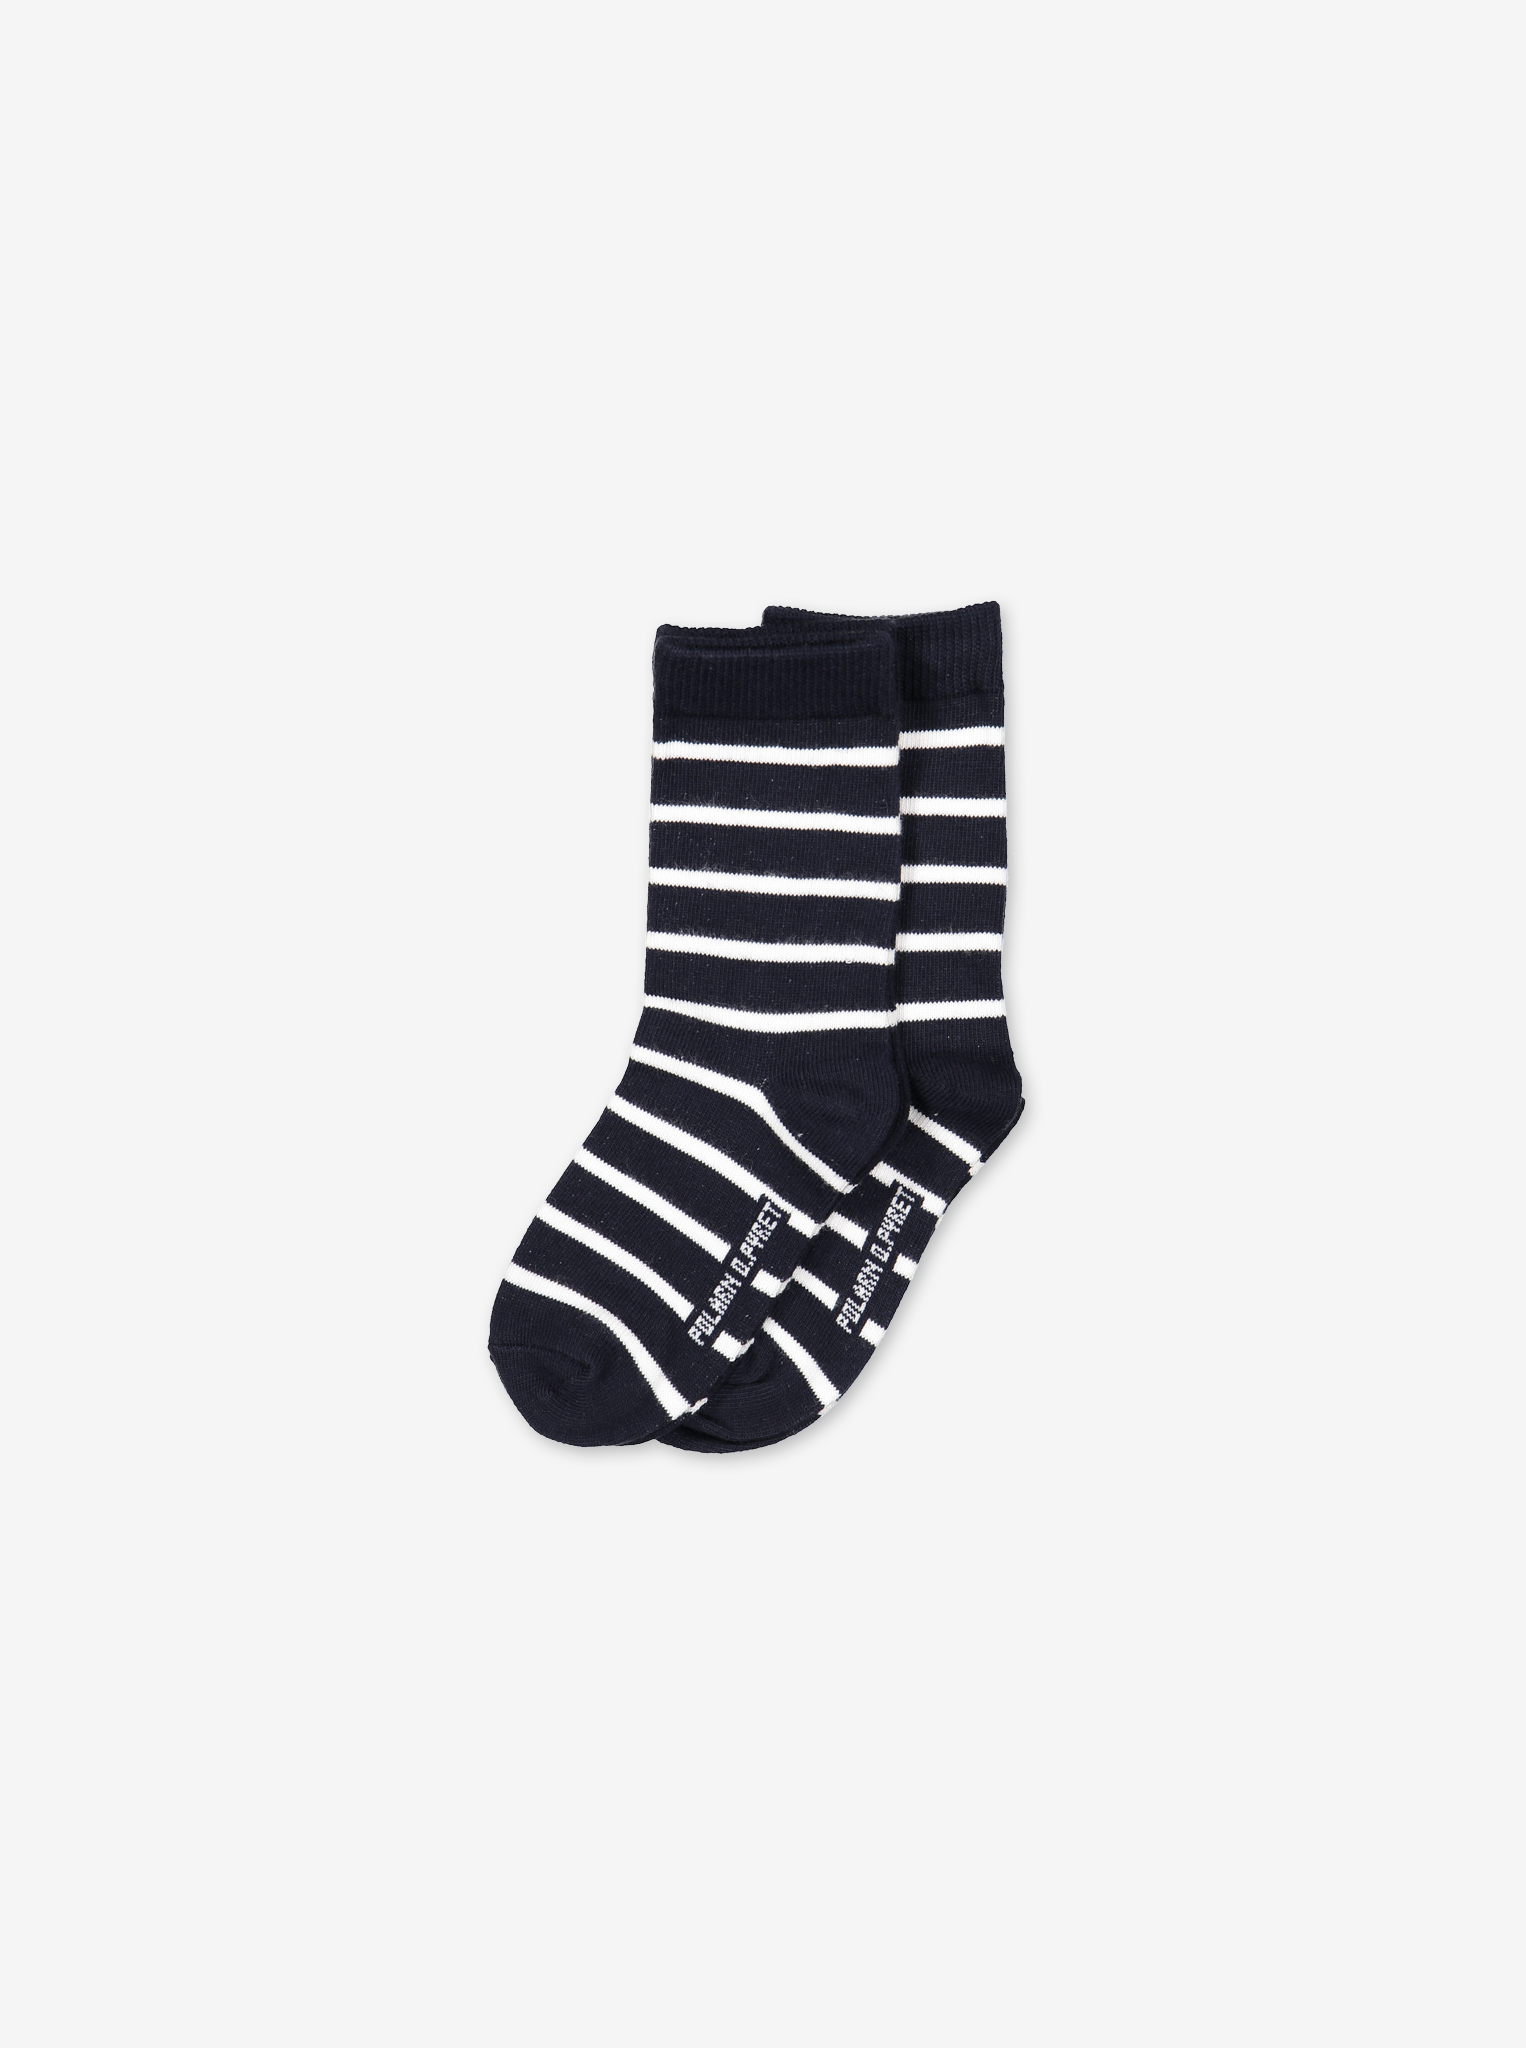 2 Pack baby Socks navy and white striped, organic cotton comfortable polarn o. pyret